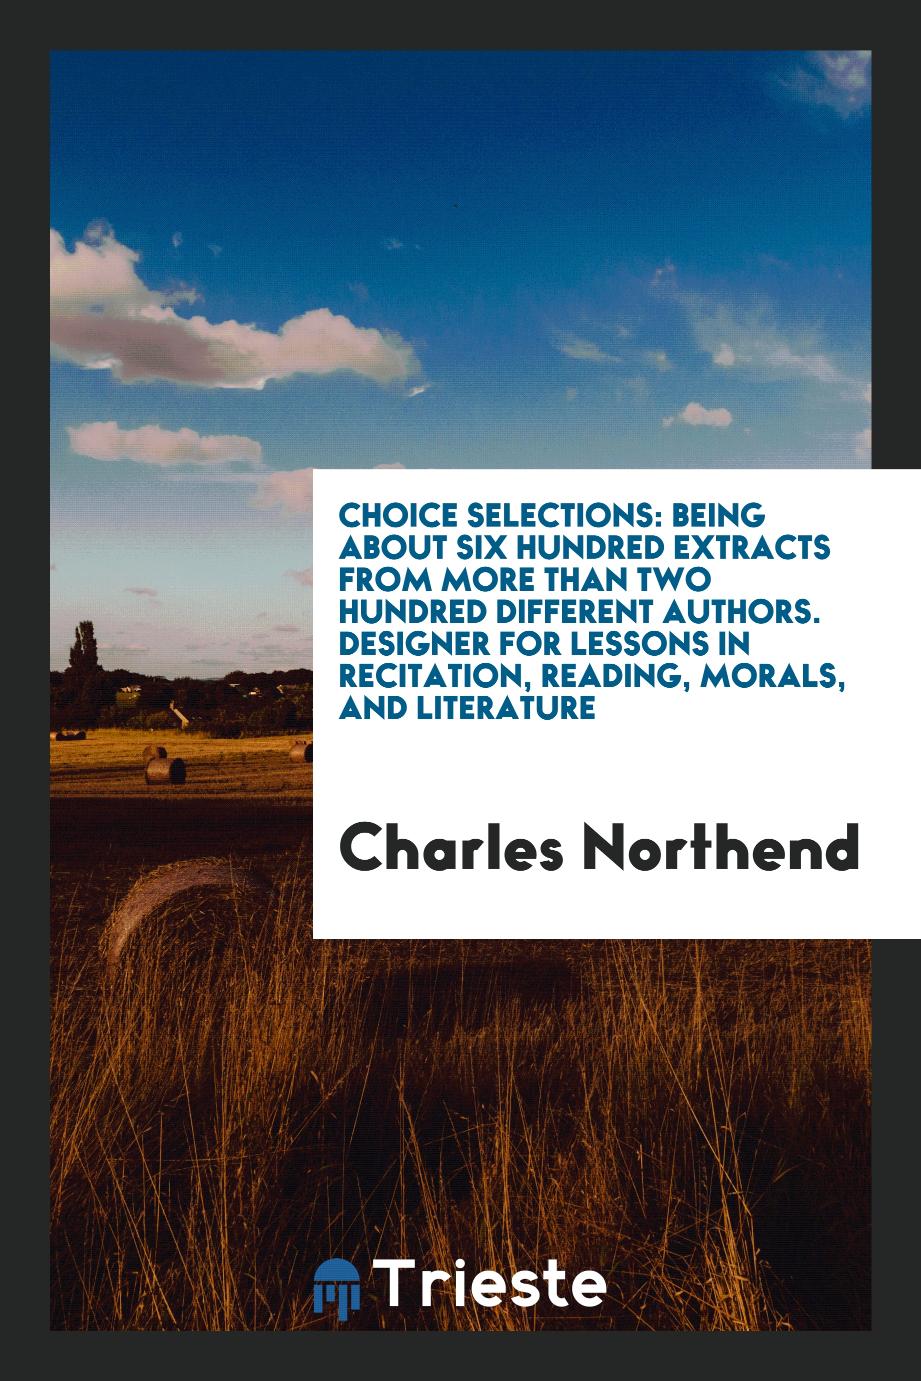 Choice Selections: Being About Six Hundred Extracts from More than Two Hundred Different Authors. Designer for Lessons in Recitation, Reading, Morals, and Literature